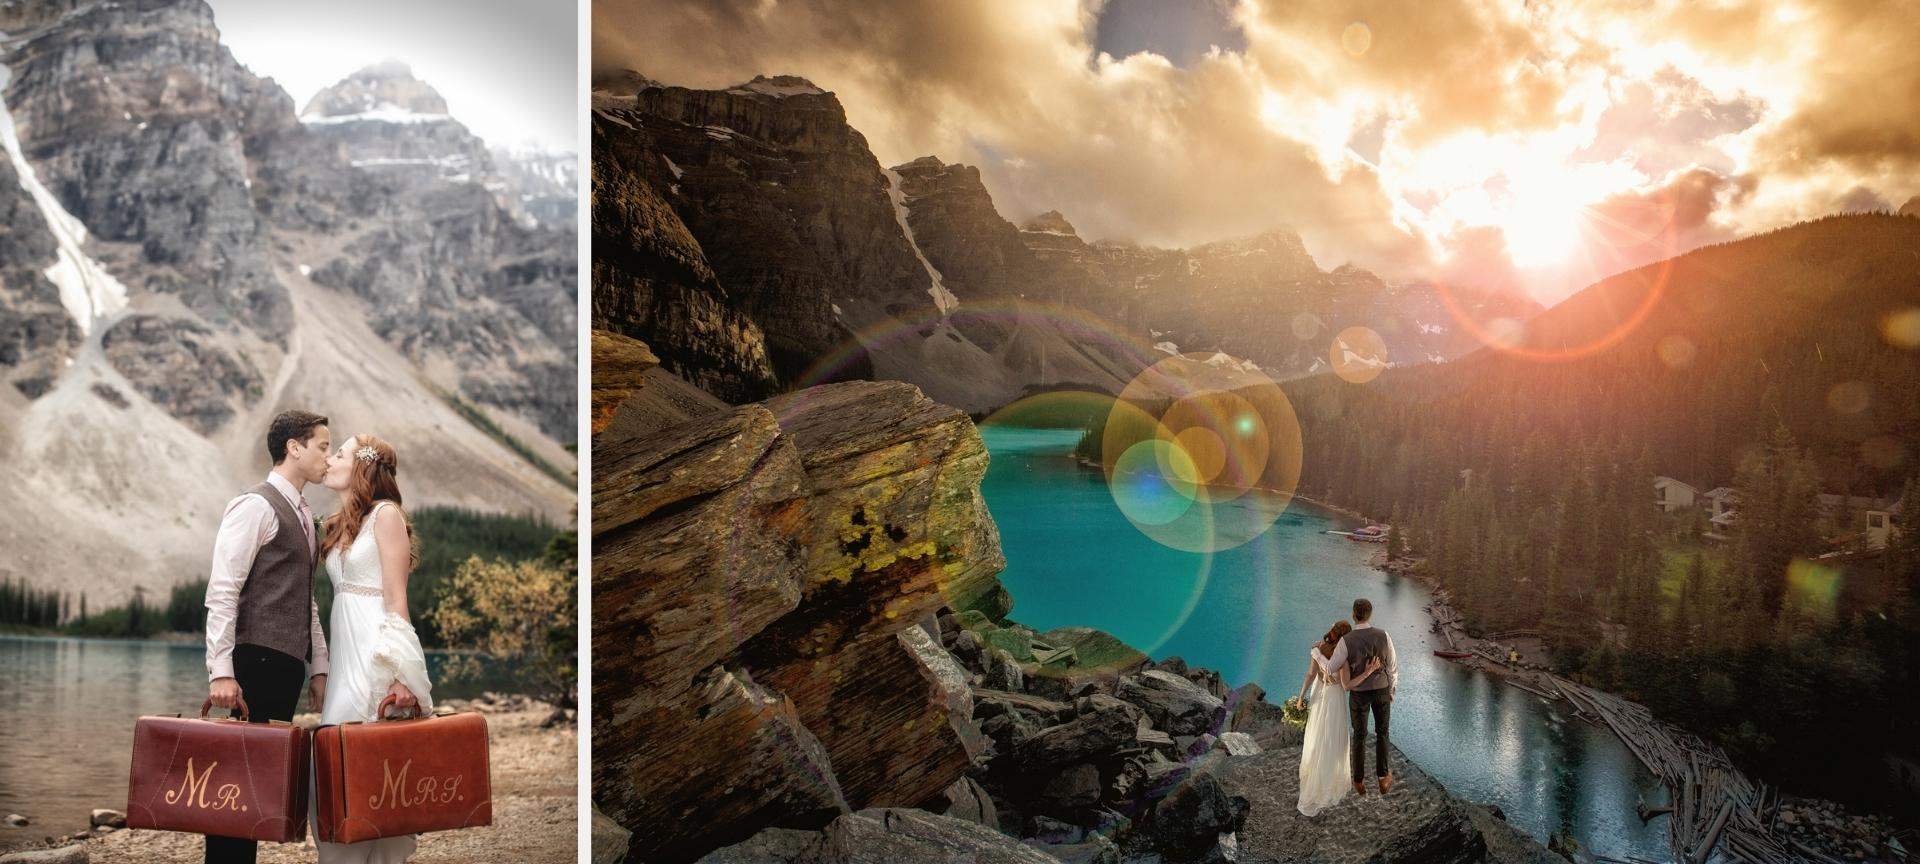 Rocky Mountains Elopement at Moraine Lake - wedding ceremony with canoe adventure